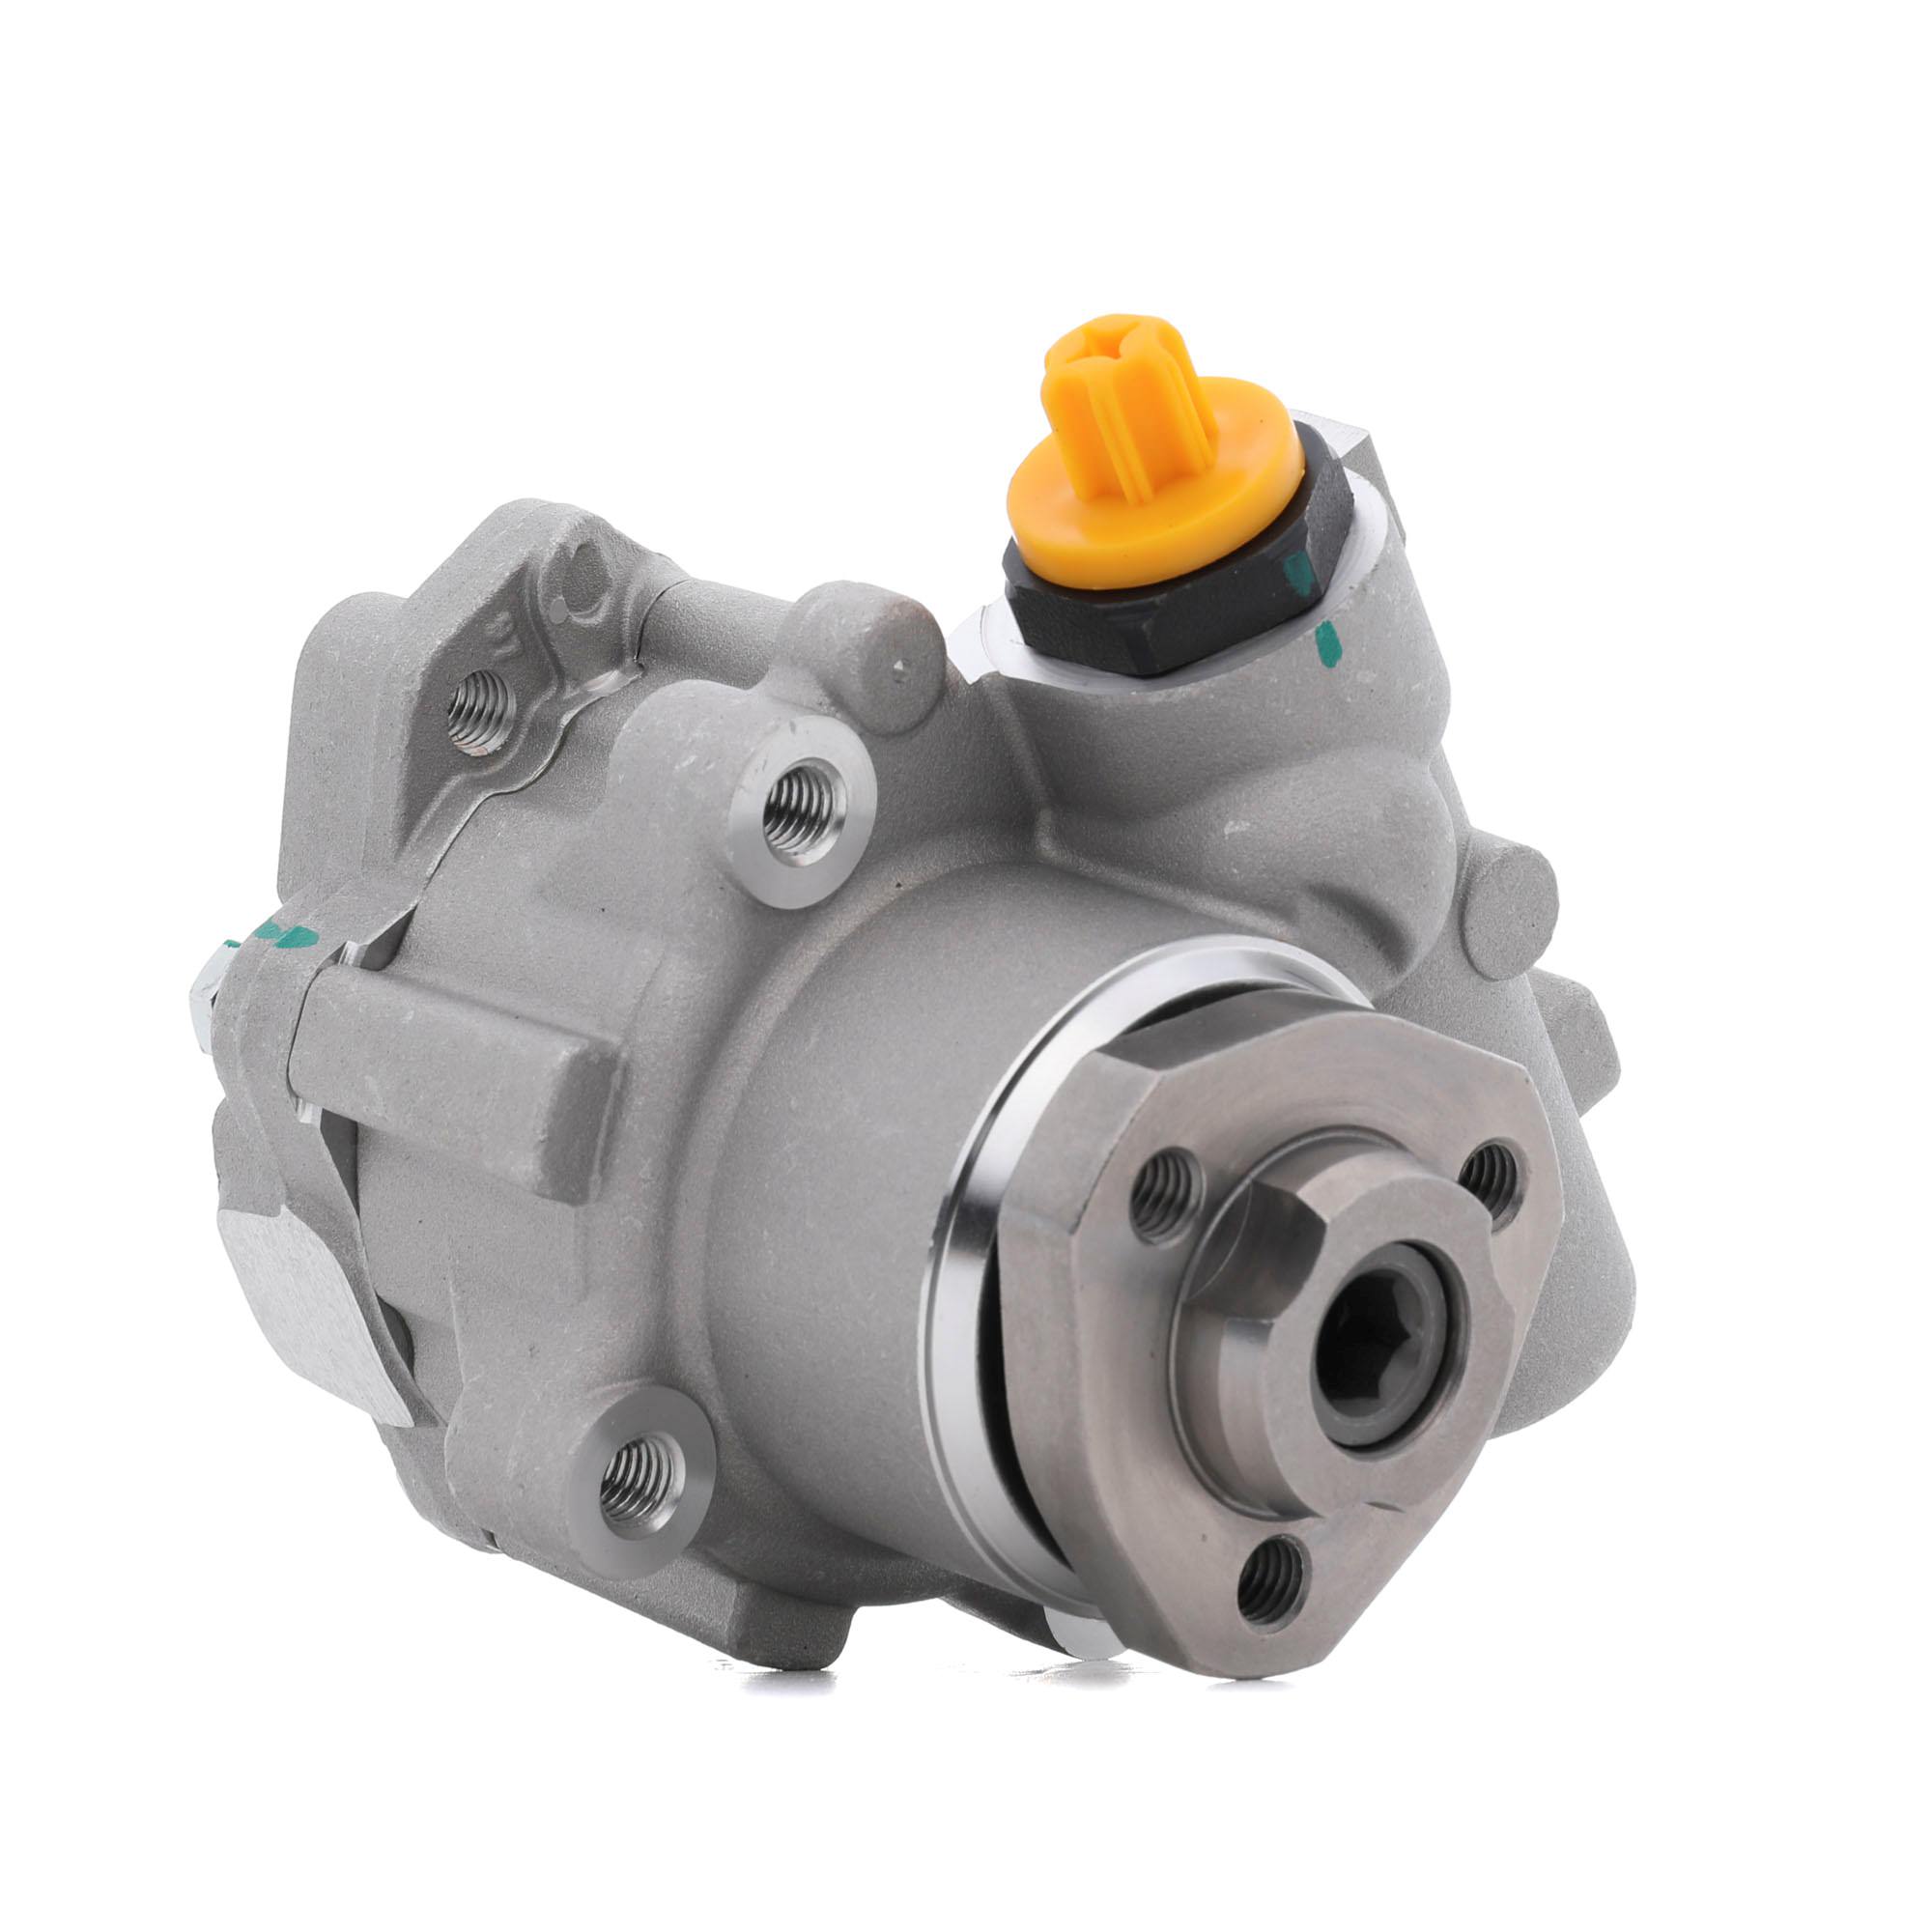 Image of RIDEX Power Steering Pump VW 12H0007 044145157A,044145157AX,701422155B Steering Pump,EHPS,EHPS Pump,Hydraulic Pump, steering system